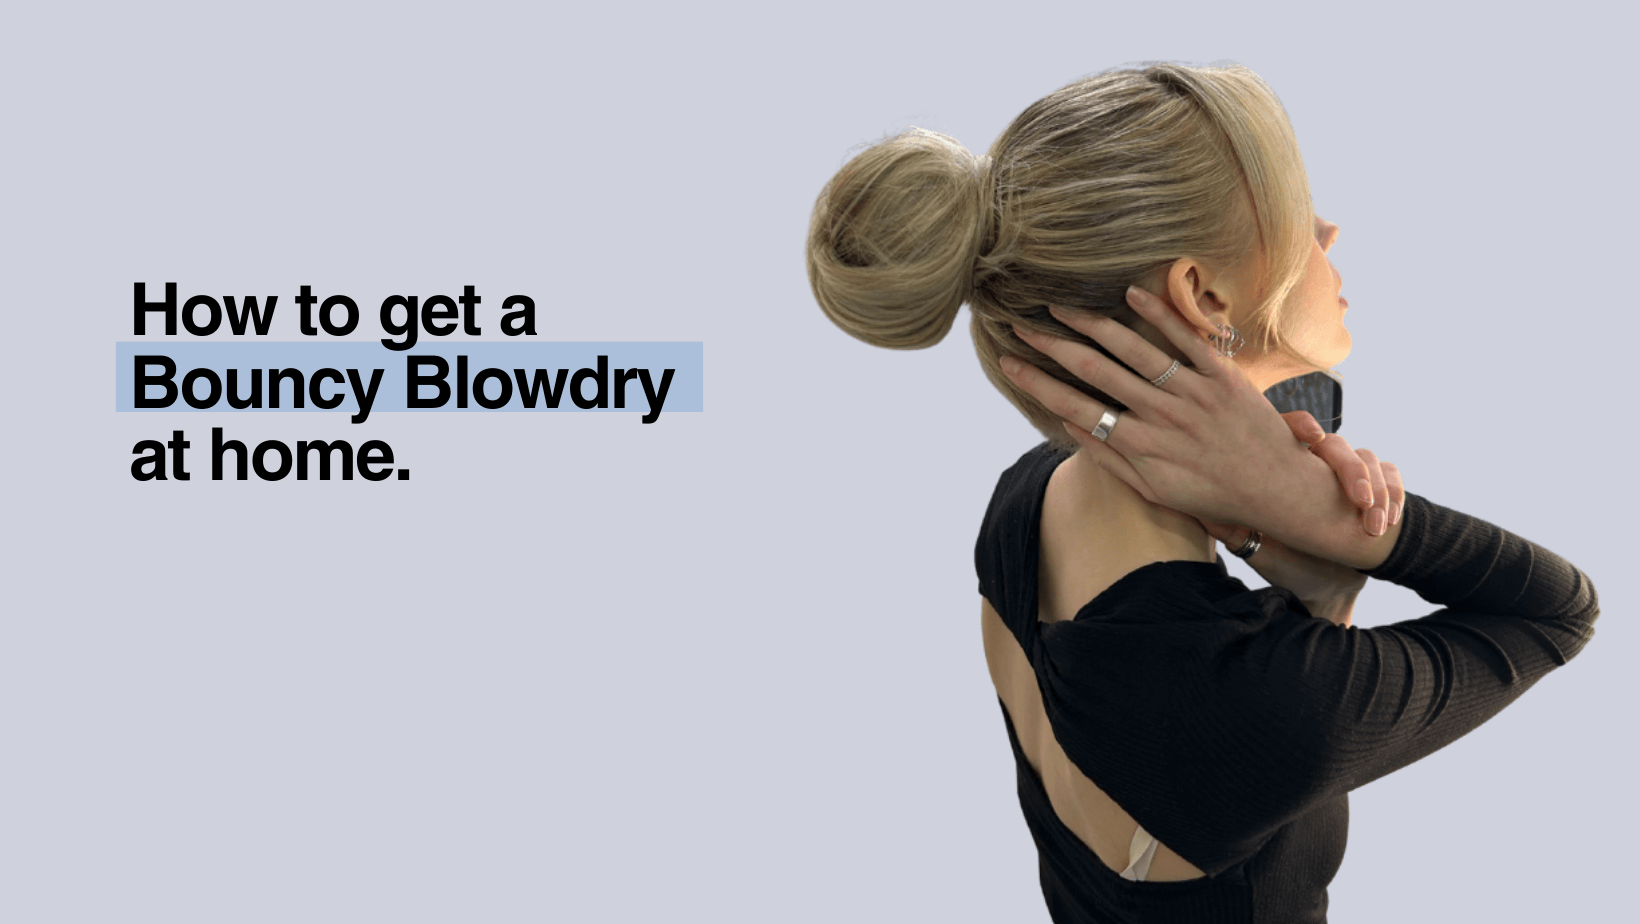 How to Get a Bouncy Blowdry at Home